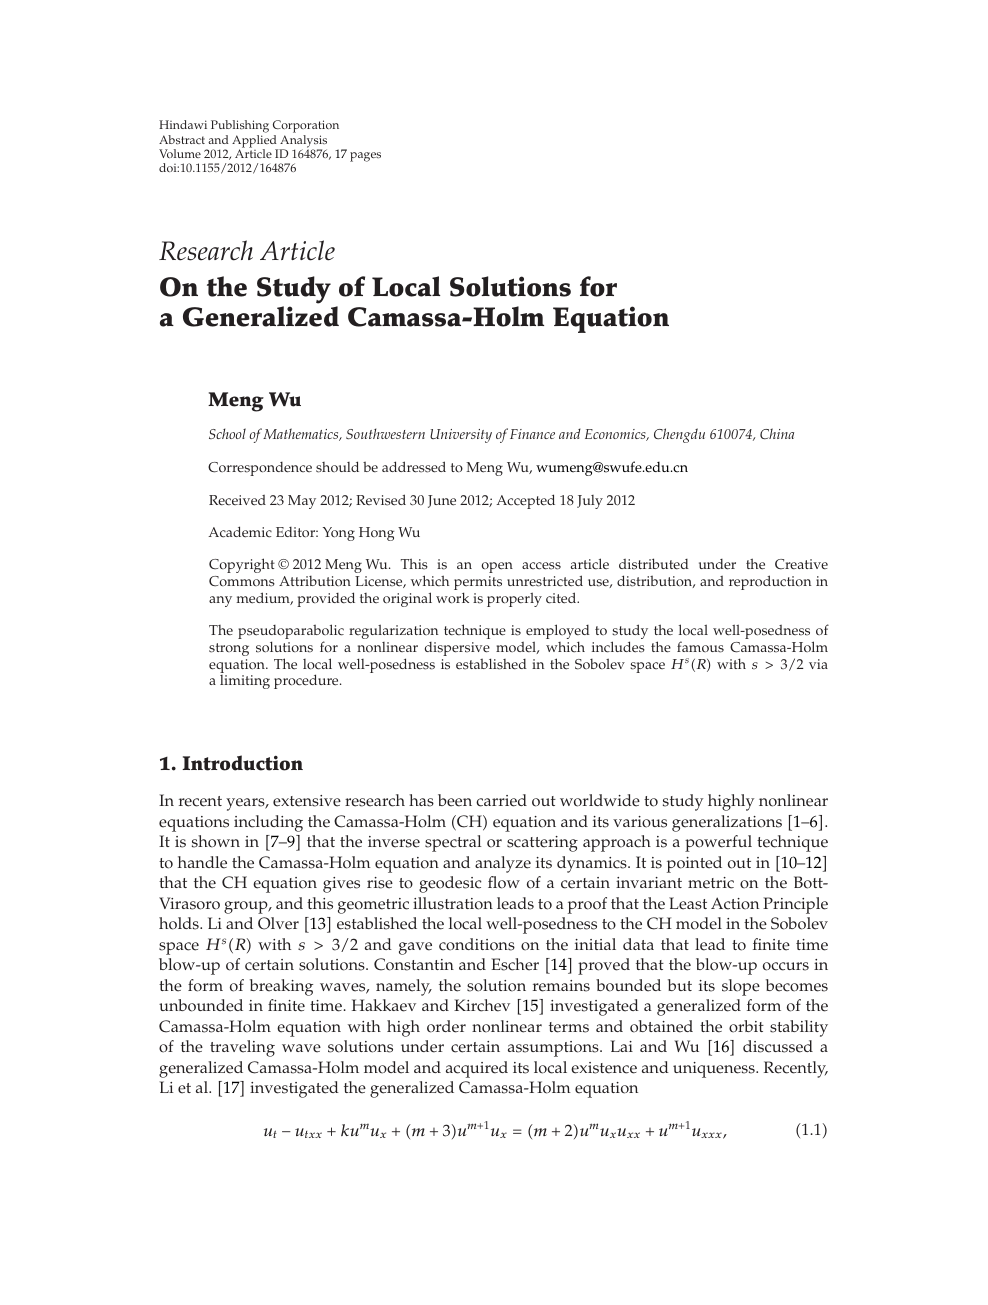 On The Study Of Local Solutions For A Generalized Camassa Holm Equation Topic Of Research Paper In Mathematics Download Scholarly Article Pdf And Read For Free On Cyberleninka Open Science Hub